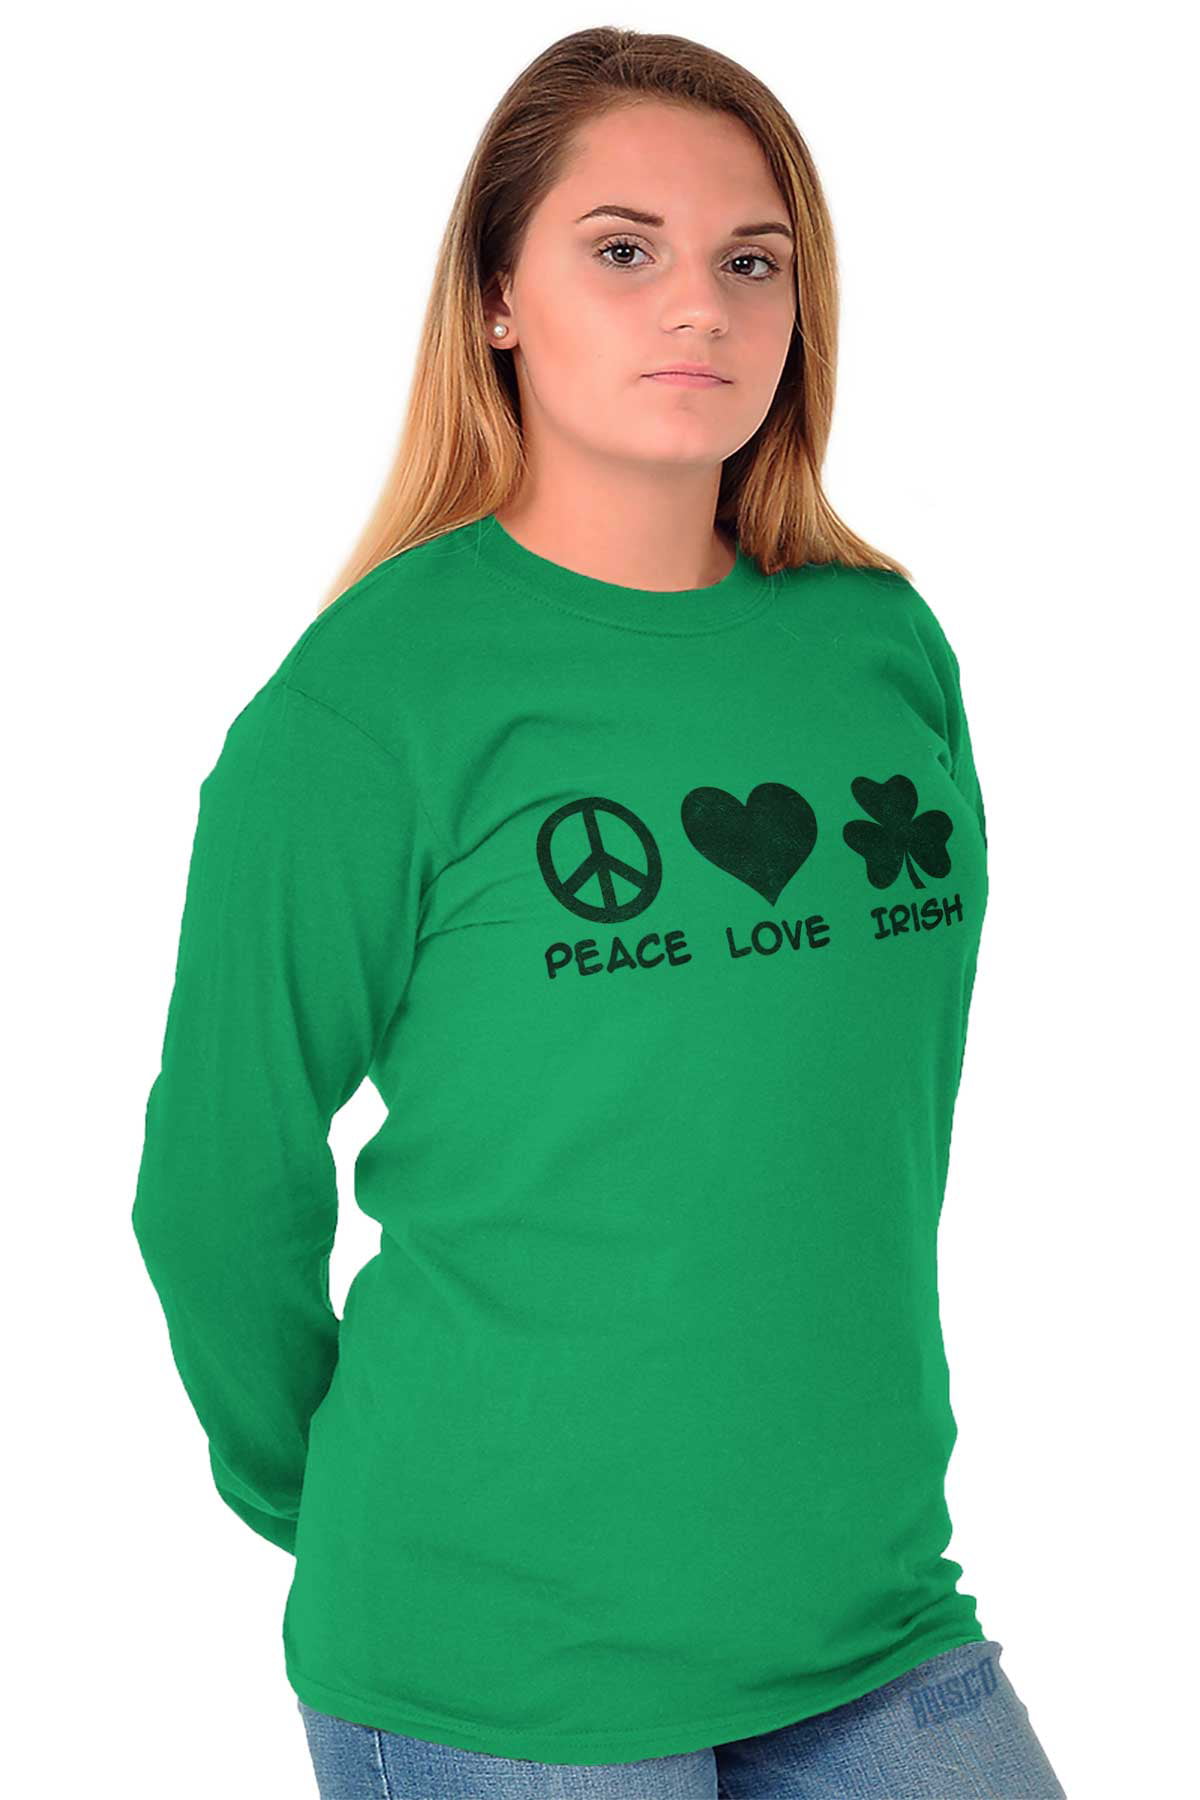 Brisco Brands - St Patrick's Day Long Sleeve T-Shirts Tee For Women